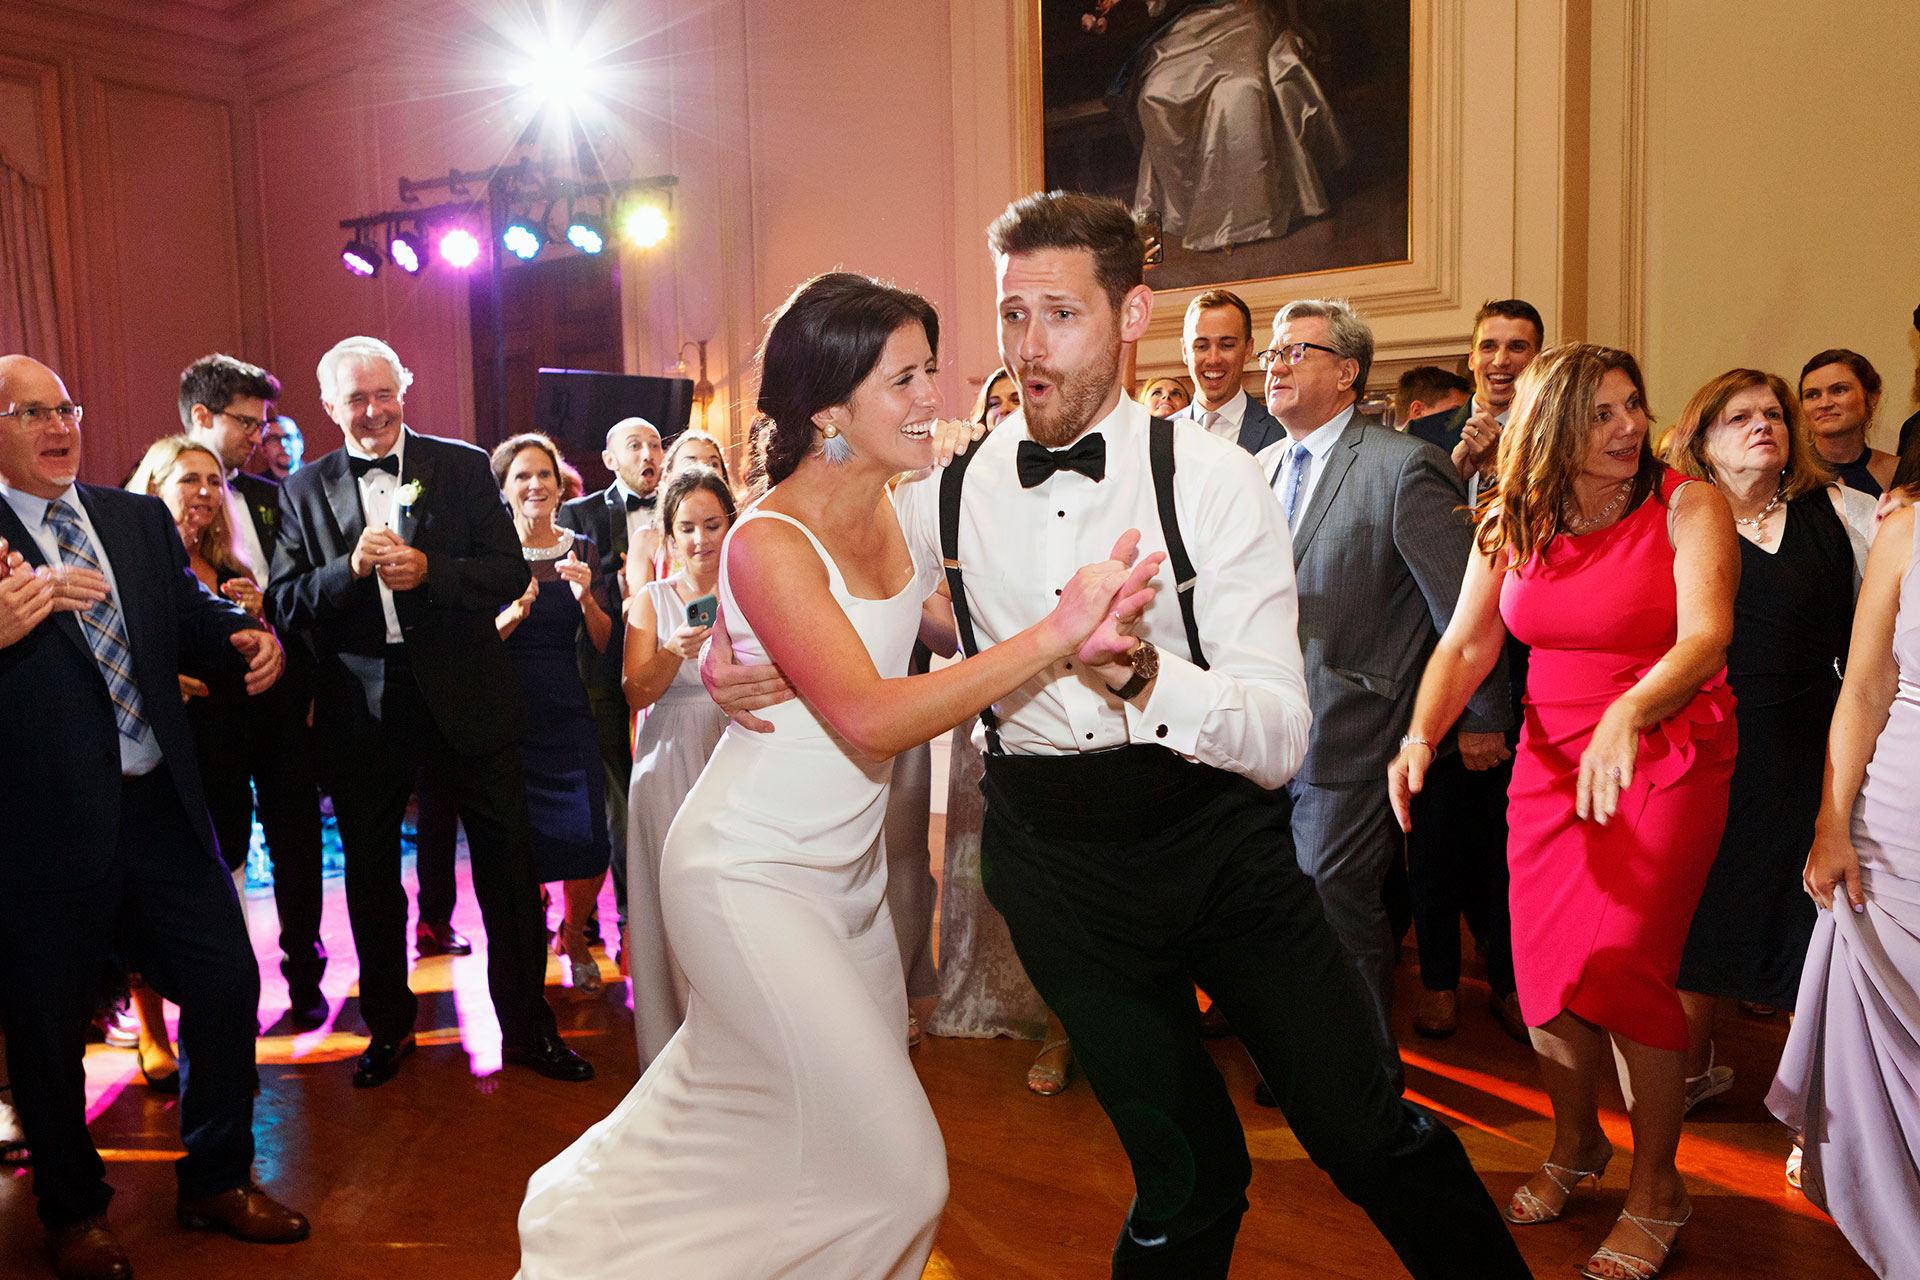 A fun couple surrounded by guests dancing on their wedding.